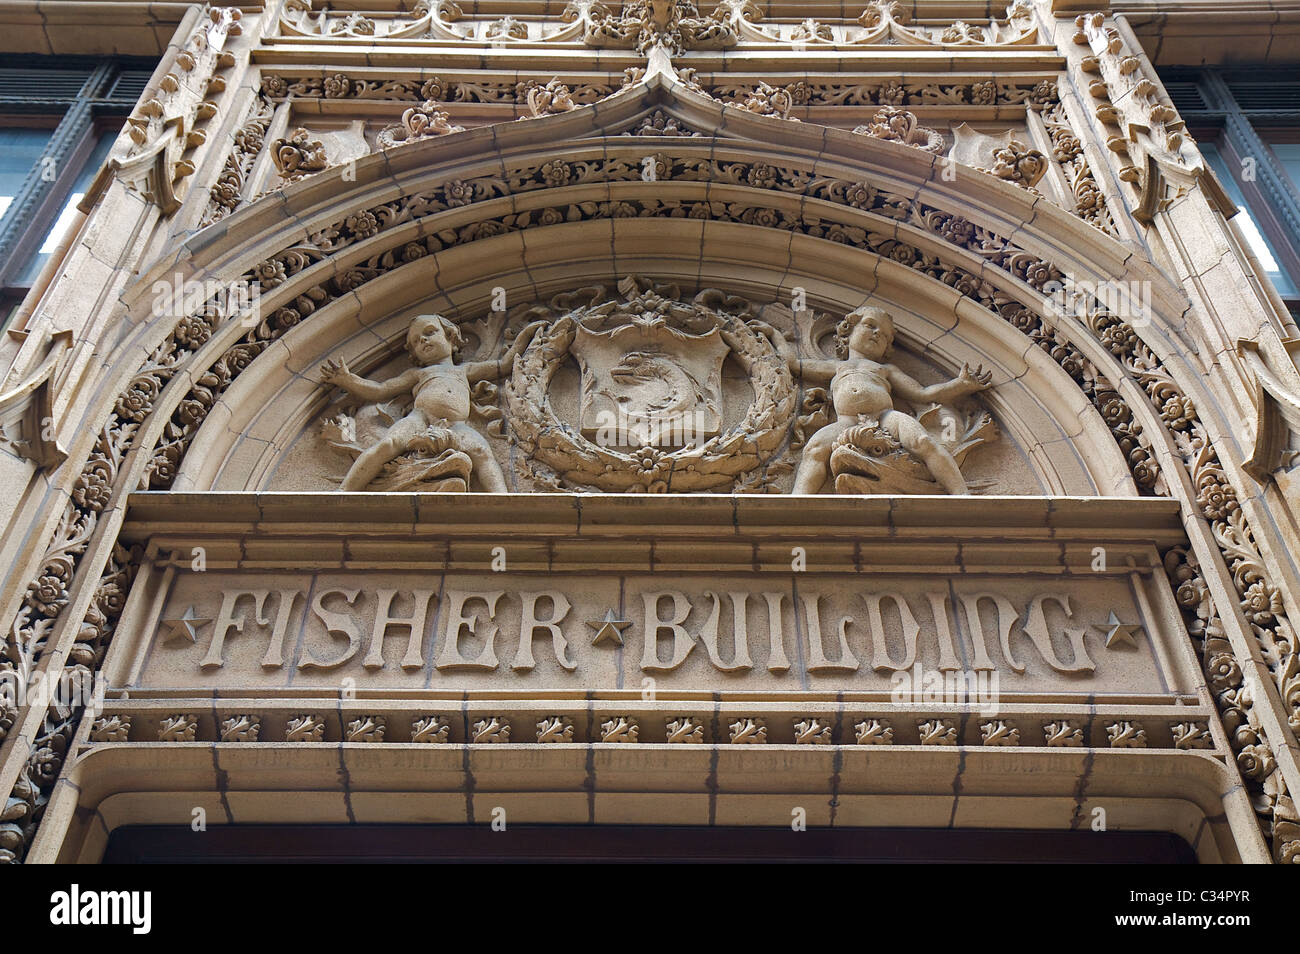 Detail of elaborate decorative work on Chicago's Fisher Building, designed by D.H. Burnham and Company and completed in 1906 Stock Photo